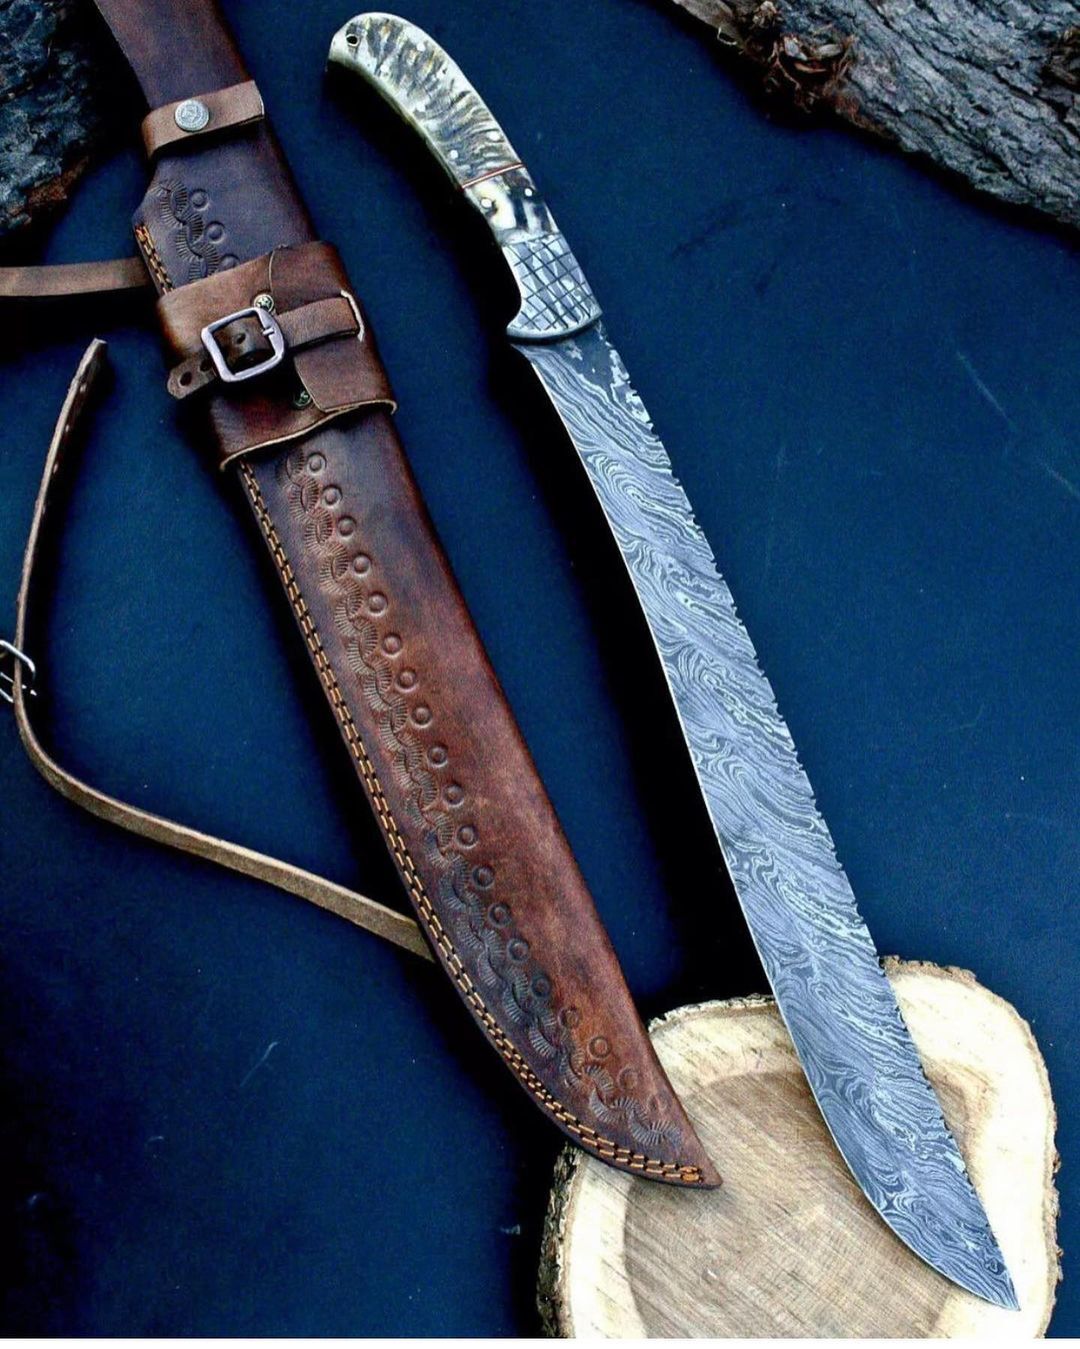 WILD CUSTOM HANDMADE 20 INCHES LONG IN DAMASCUS STEEL HUNTING LONG BOWIE KNIFE